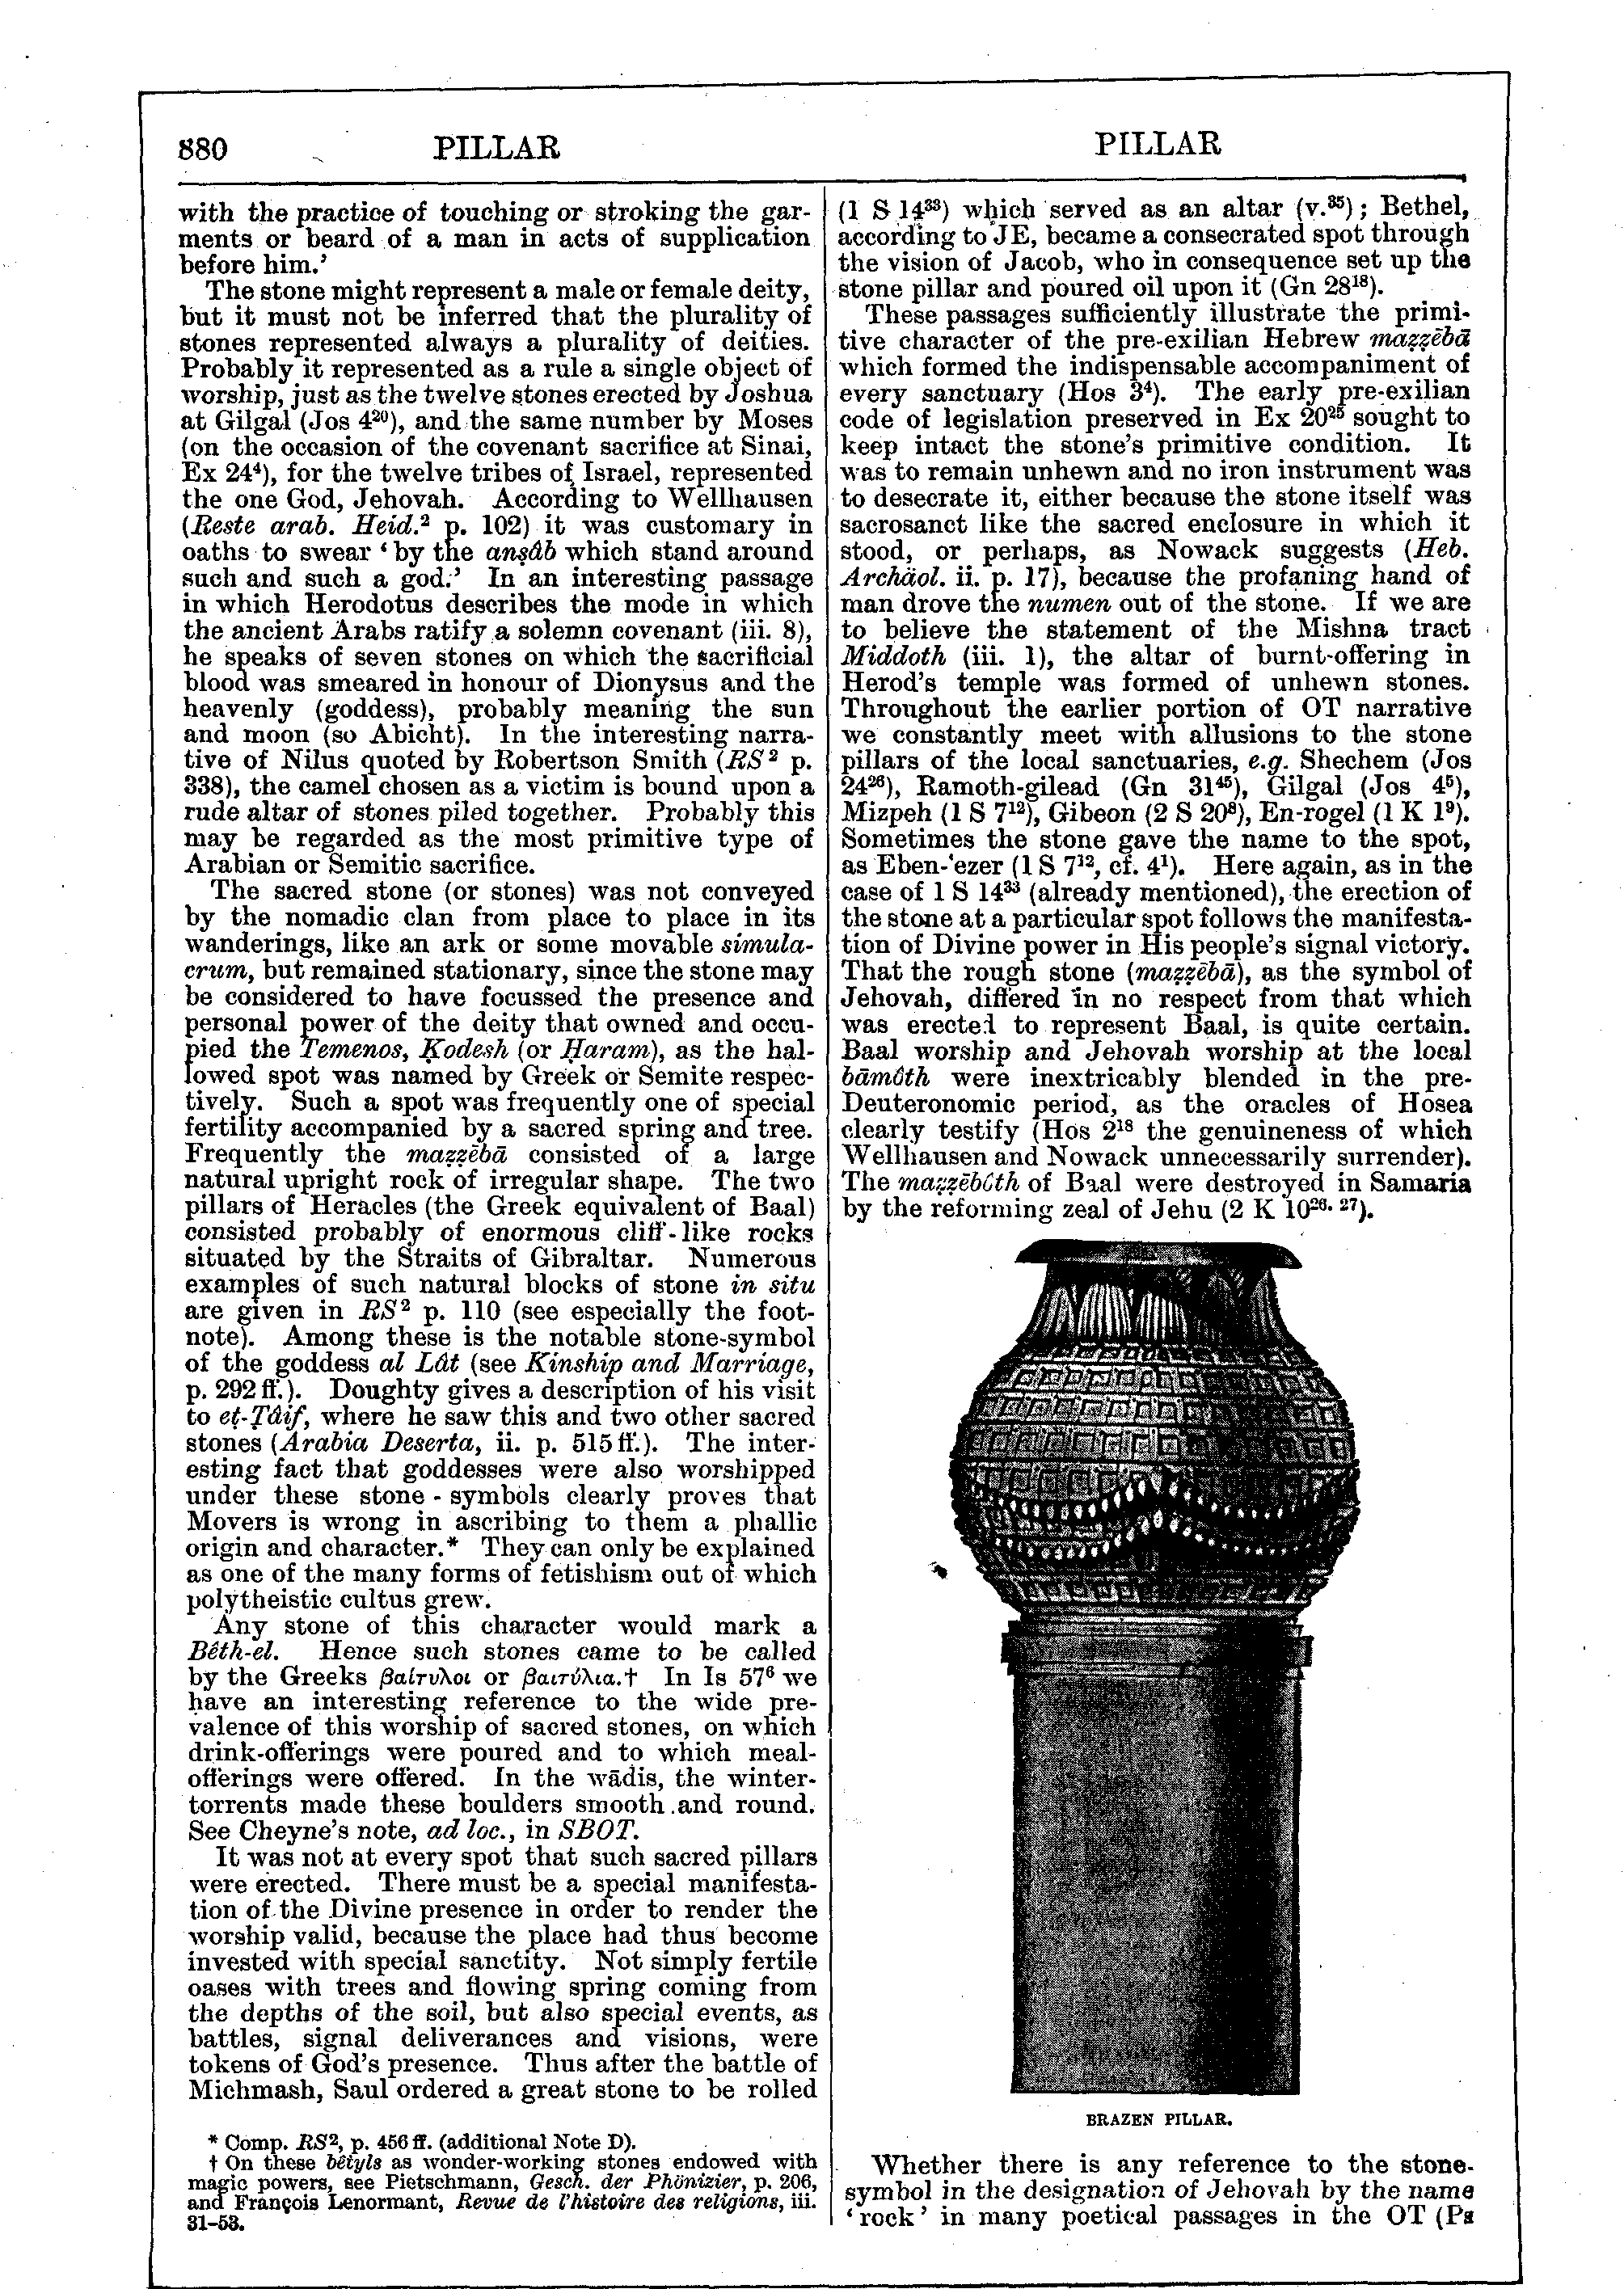 Image of page 880